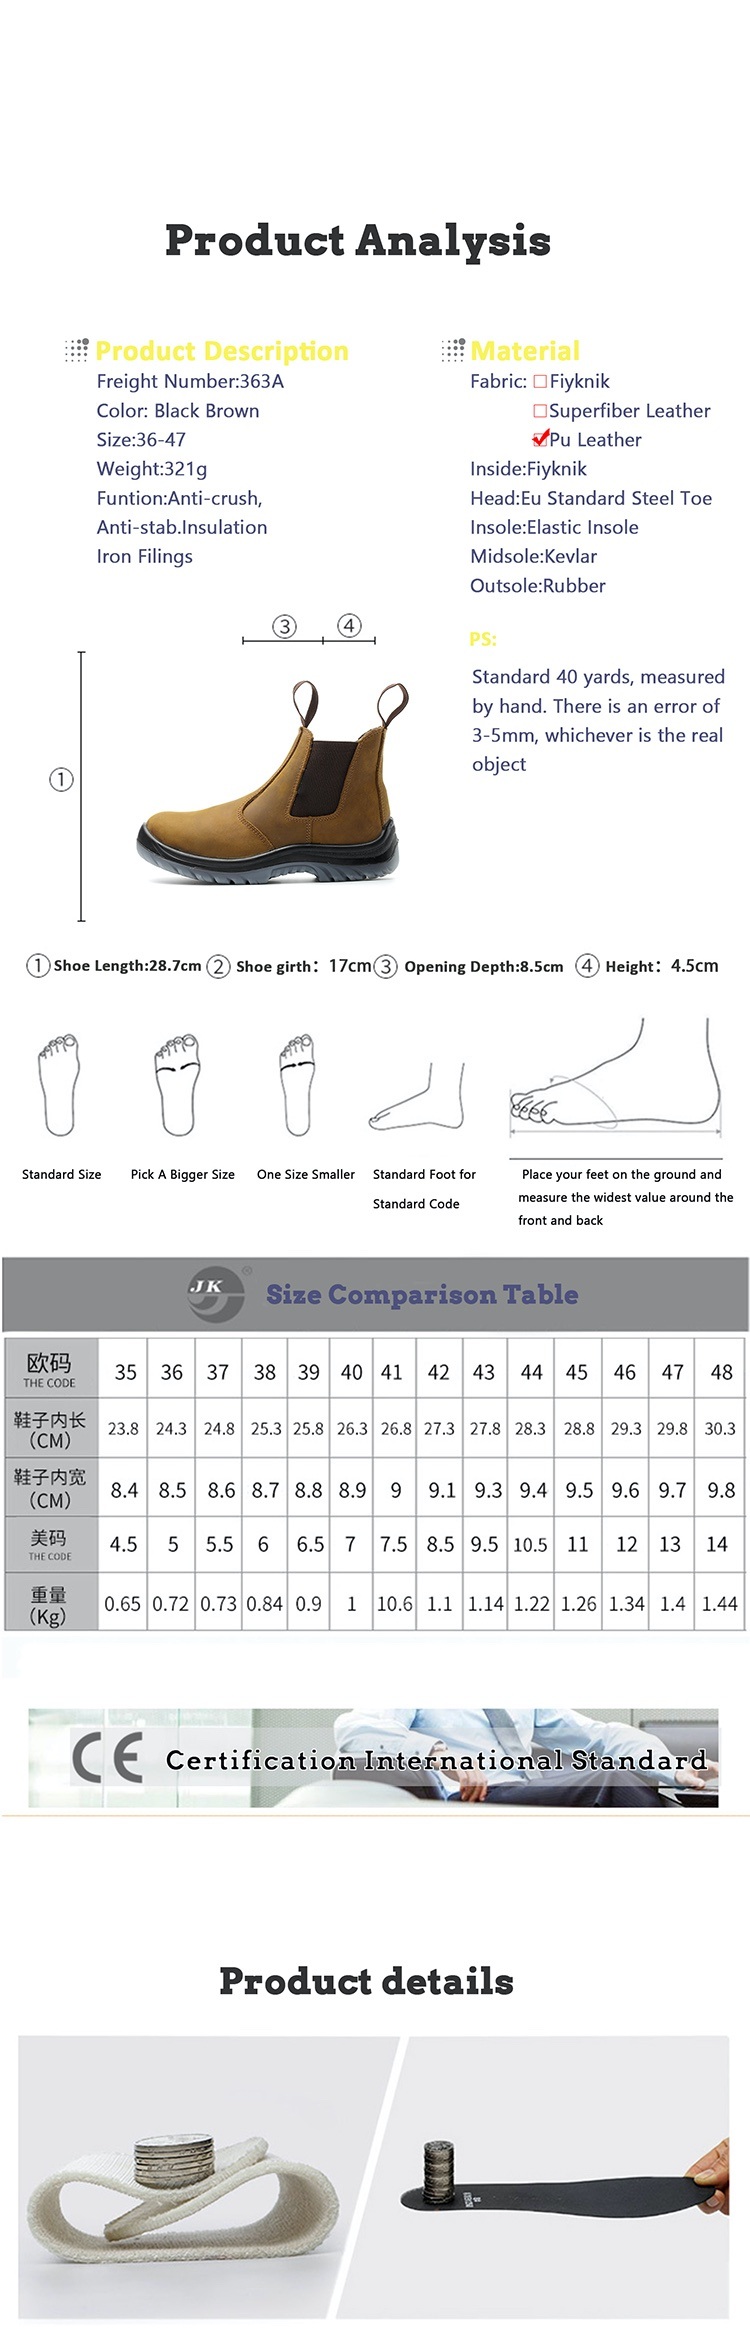 Light Weight Construction Cowboy Lightweight Armored Rigger Shoes Safety Boots for Work